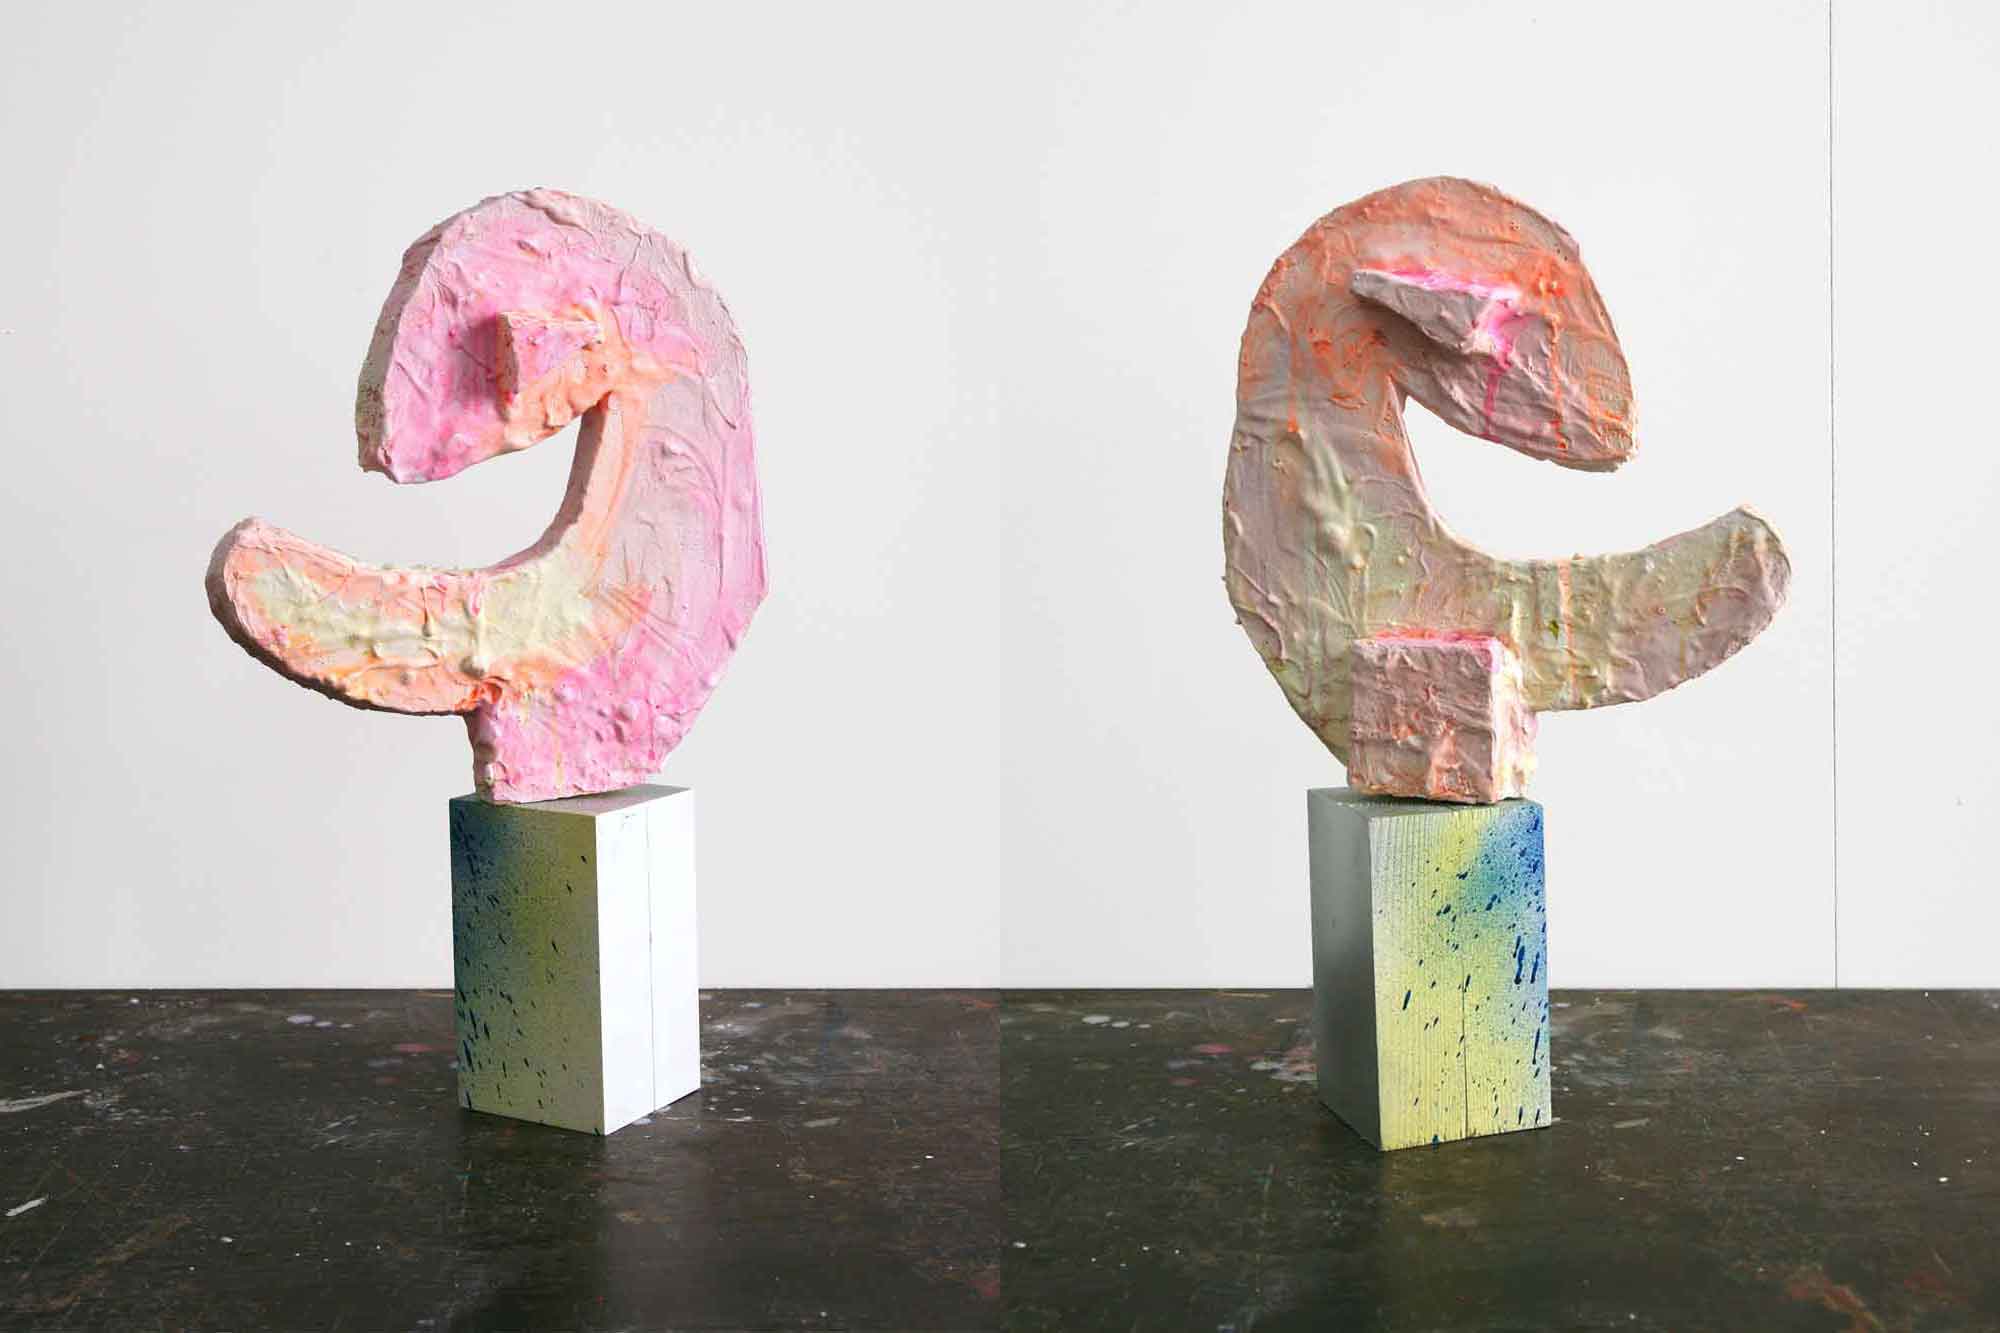 Aggtelek, Yes Sculpture #2 Polyurethane, plaster, wood and tempera, 17 x 13 7.8 in. / 43 x 33 x 20 cm